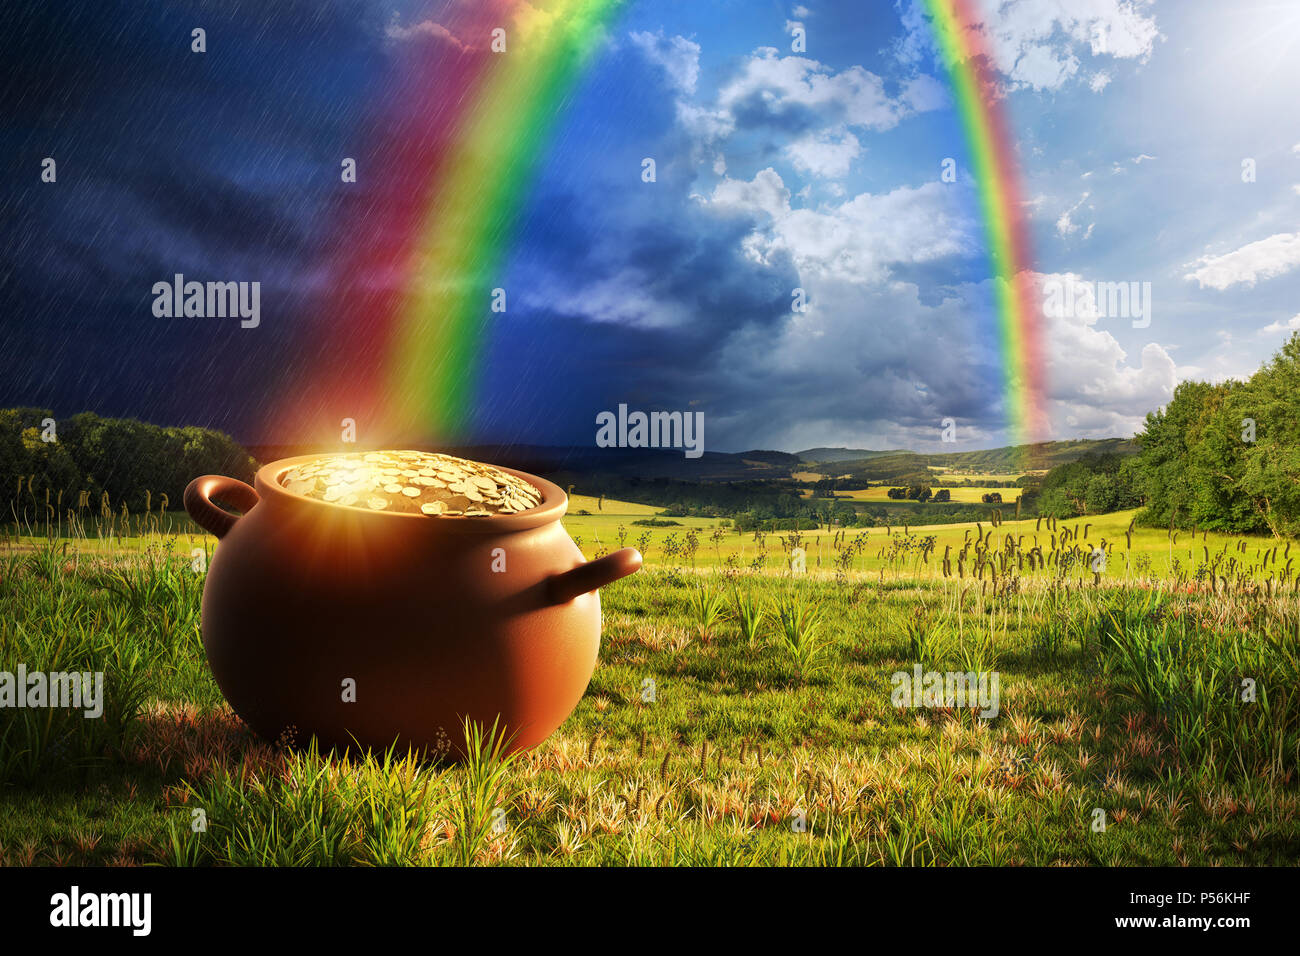 Pot full of gold at the end of the rainbow. Stock Photo